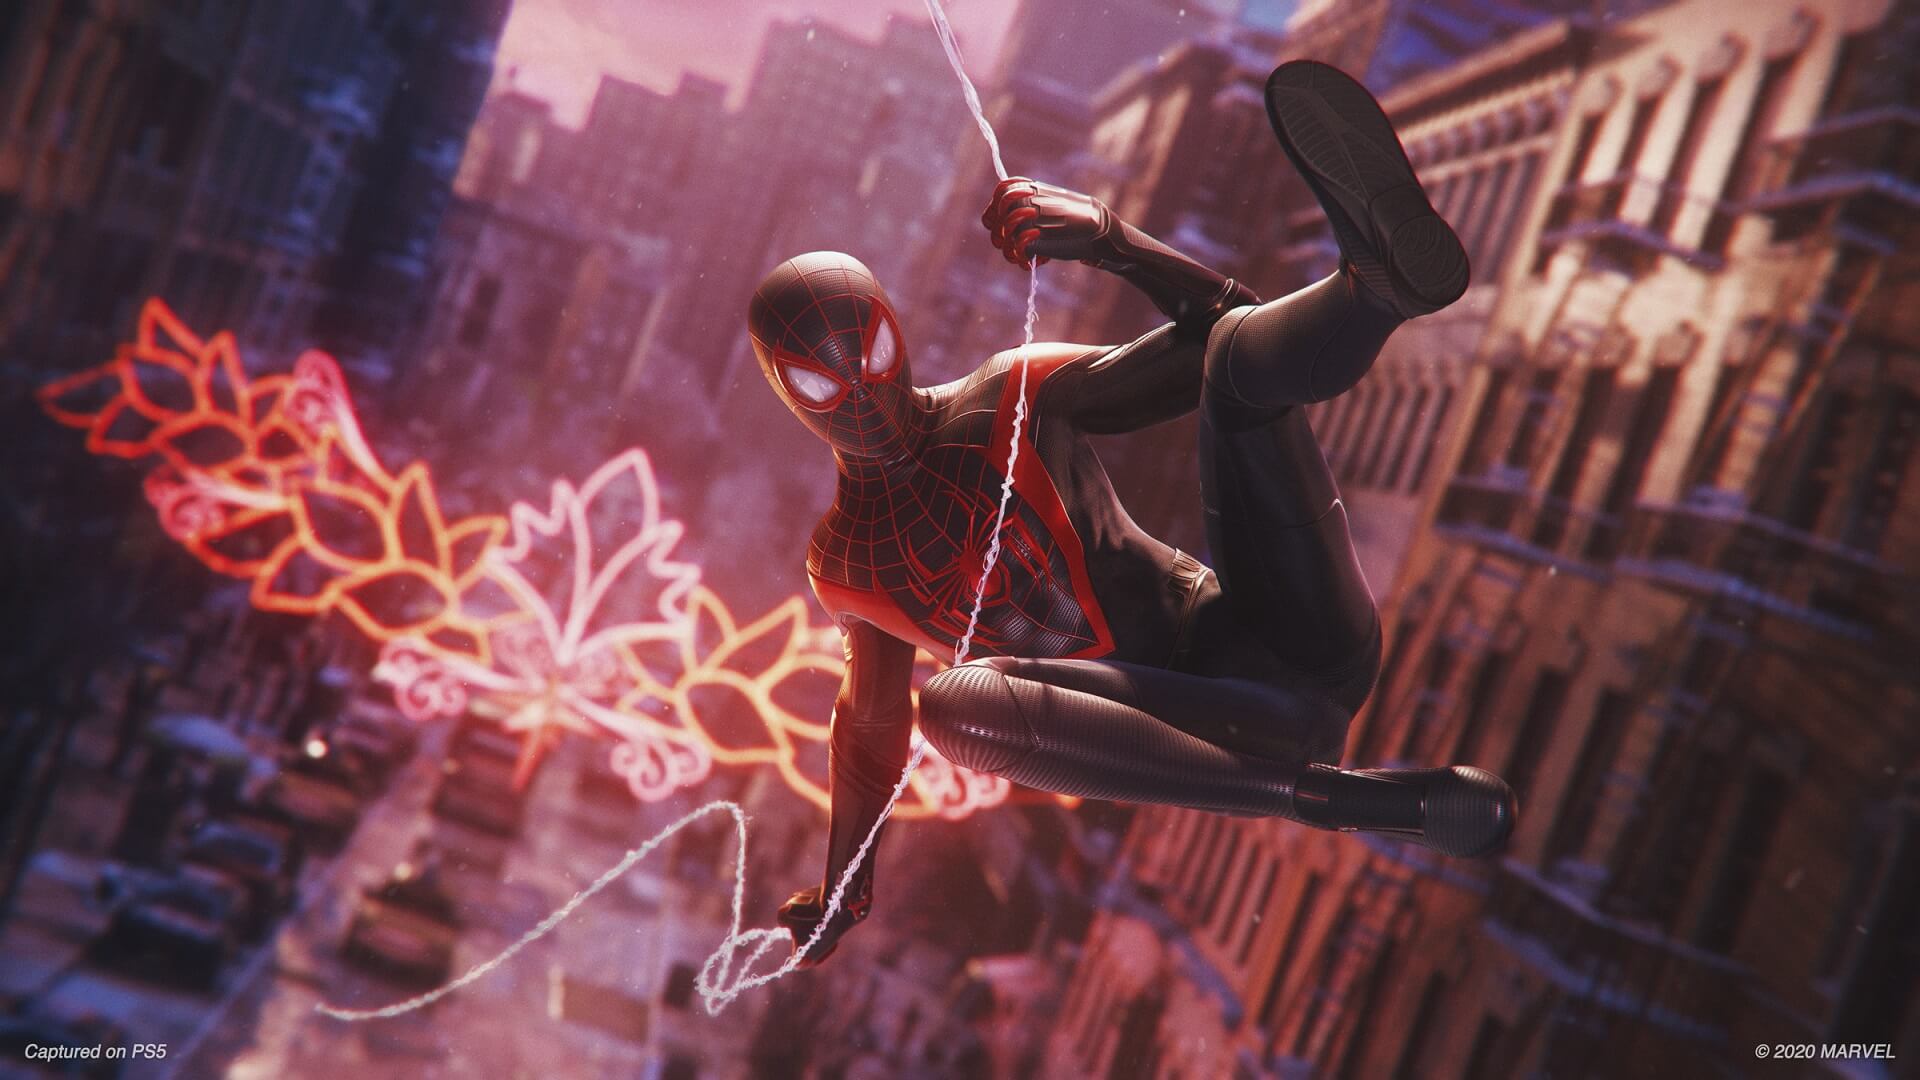 Miles Morales swinging through the city in Marvel's Spider-Man: Miles Morales on PS5